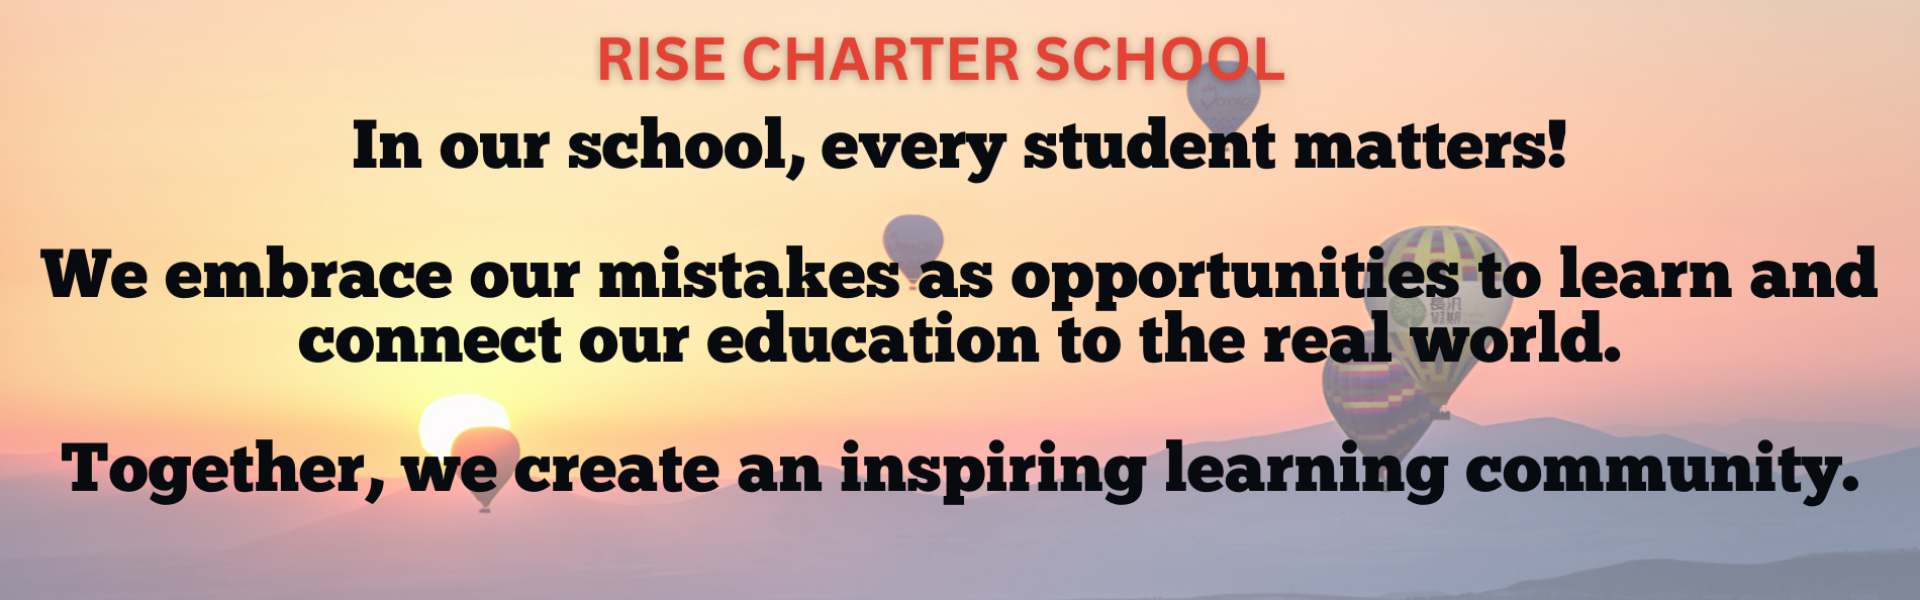 RISE CHARTER SCHOOL VISION